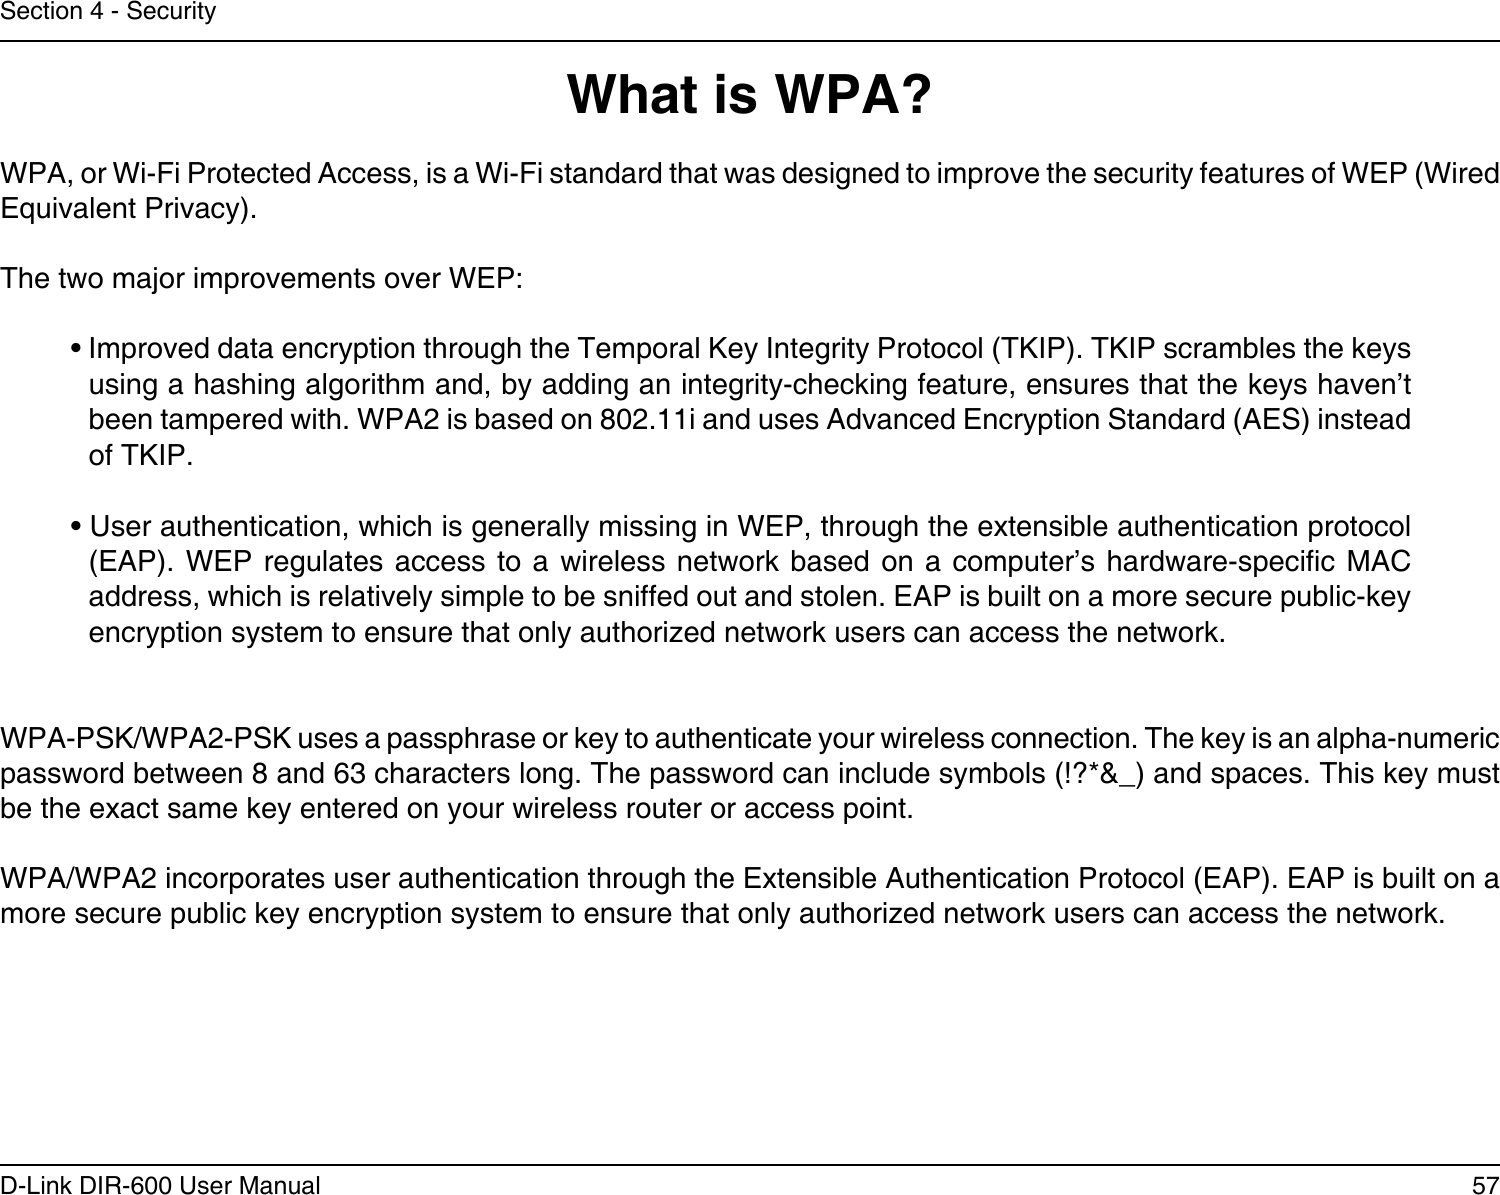 57D-Link DIR-600 User ManualSection 4 - SecurityWhat is WPA?WPA, or Wi-Fi Protected Access, is a Wi-Fi standard that was designed to improve the security features of WEP (Wired Equivalent Privacy).  The two major improvements over WEP: • Improved data encryption through the Temporal Key Integrity Protocol (TKIP). TKIP scrambles the keys using a hashing algorithm and, by adding an integrity-checking feature, ensures that the keys haven’t been tampered with. WPA2 is based on 802.11i and uses Advanced Encryption Standard (AES) instead of TKIP.• User authentication, which is generally missing in WEP, through the extensible authentication protocol (EAP). WEP regulates  access to  a wireless network  based on a  computer’s hardware-specic MAC address, which is relatively simple to be sniffed out and stolen. EAP is built on a more secure public-key encryption system to ensure that only authorized network users can access the network.WPA-PSK/WPA2-PSK uses a passphrase or key to authenticate your wireless connection. The key is an alpha-numeric password between 8 and 63 characters long. The password can include symbols (!?*&amp;_) and spaces. This key must be the exact same key entered on your wireless router or access point.WPA/WPA2 incorporates user authentication through the Extensible Authentication Protocol (EAP). EAP is built on a more secure public key encryption system to ensure that only authorized network users can access the network.